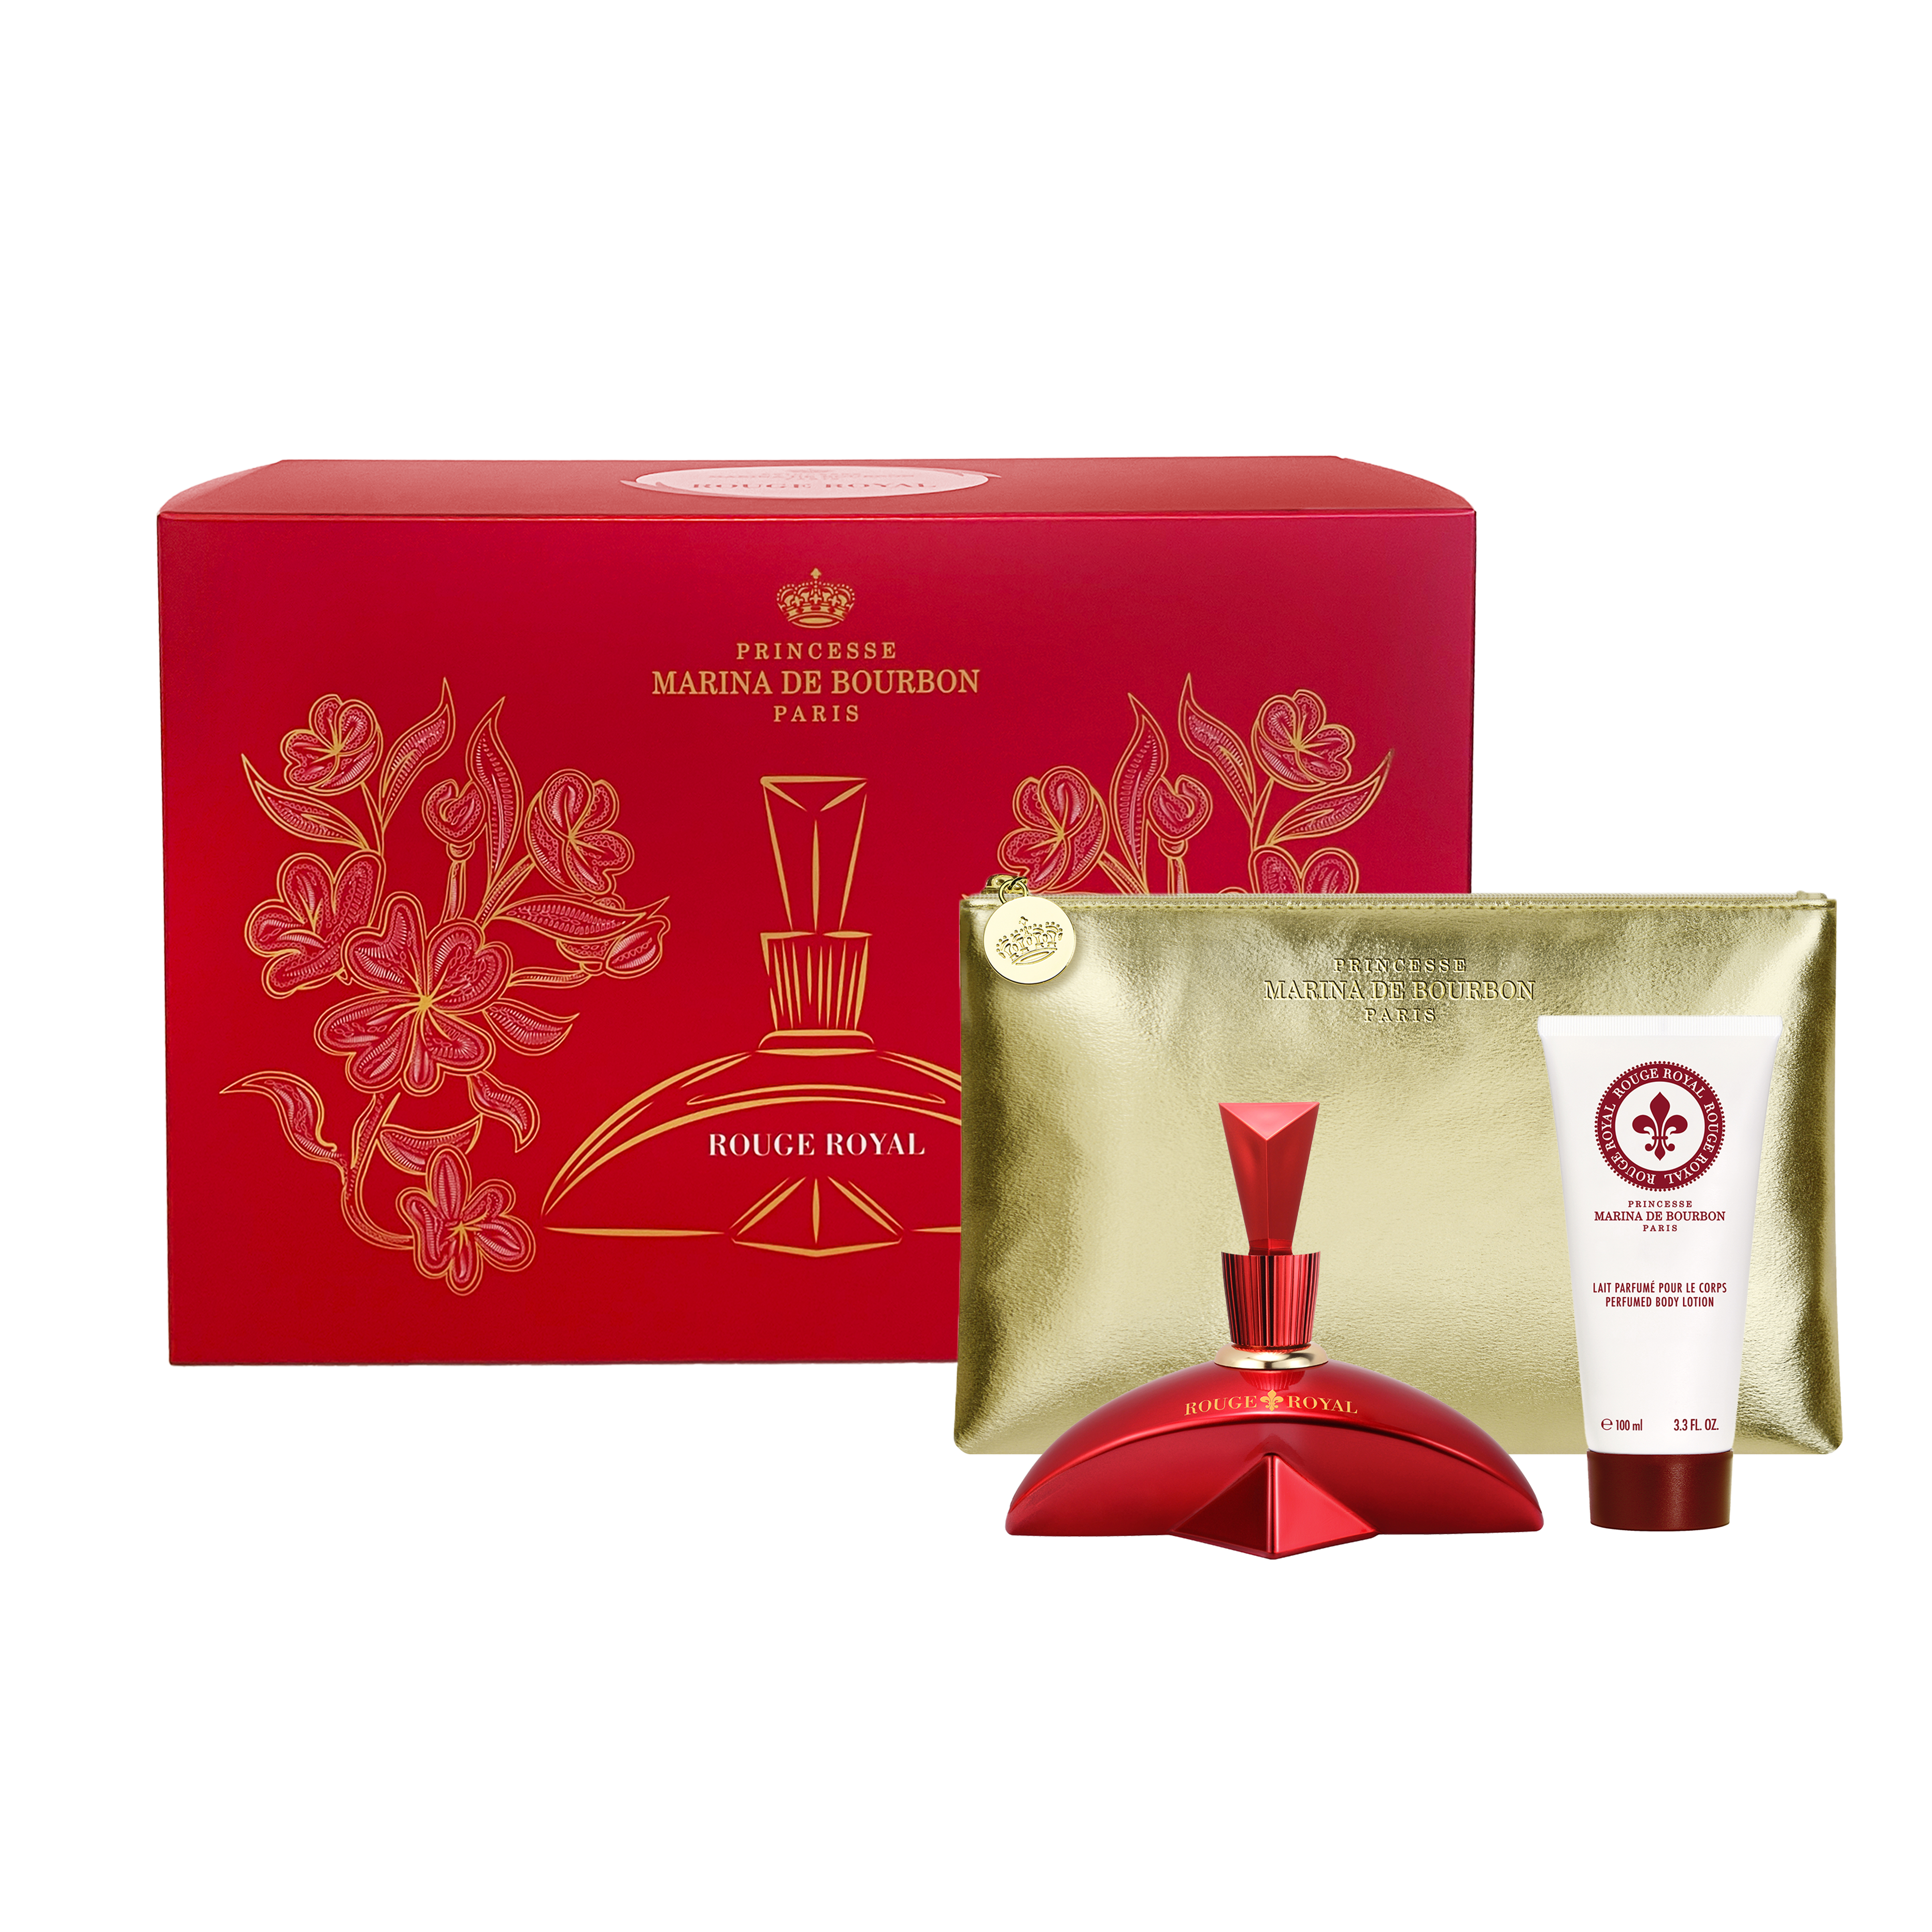 ROYAL MARINA DIAMOND 100ml Gift Set - A pouch and the perfumed body lotion offered